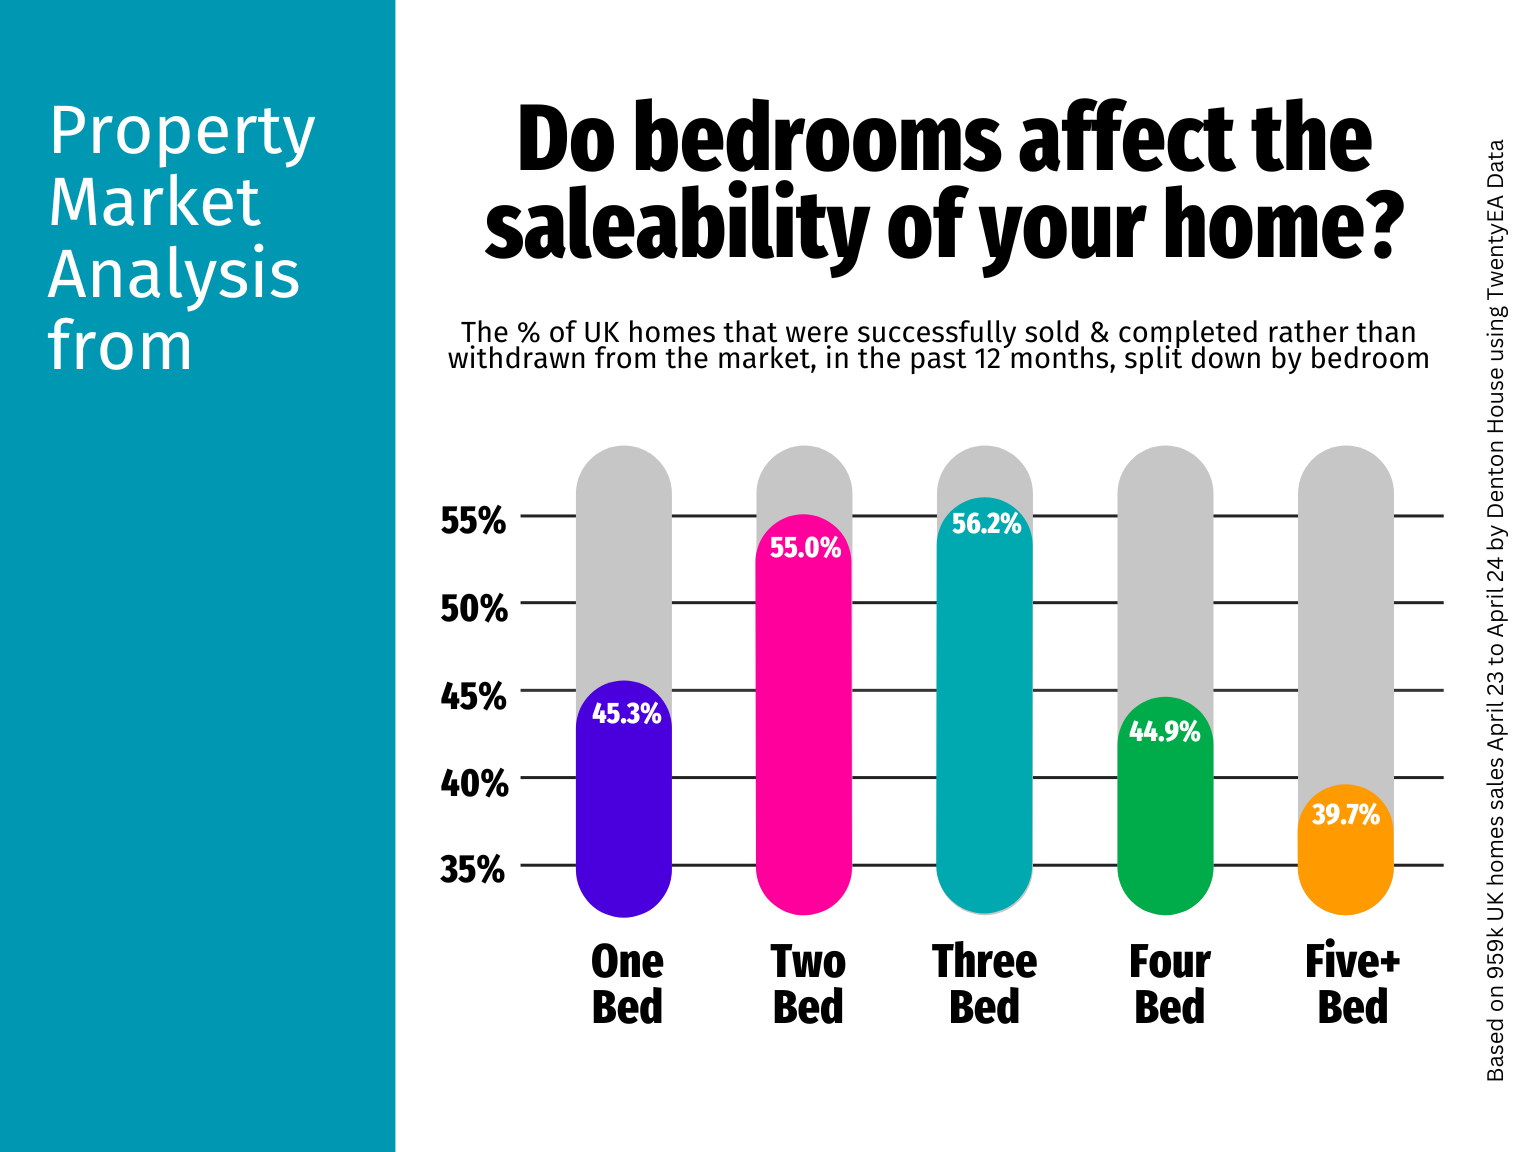 Do bedrooms affect the saleability of your home